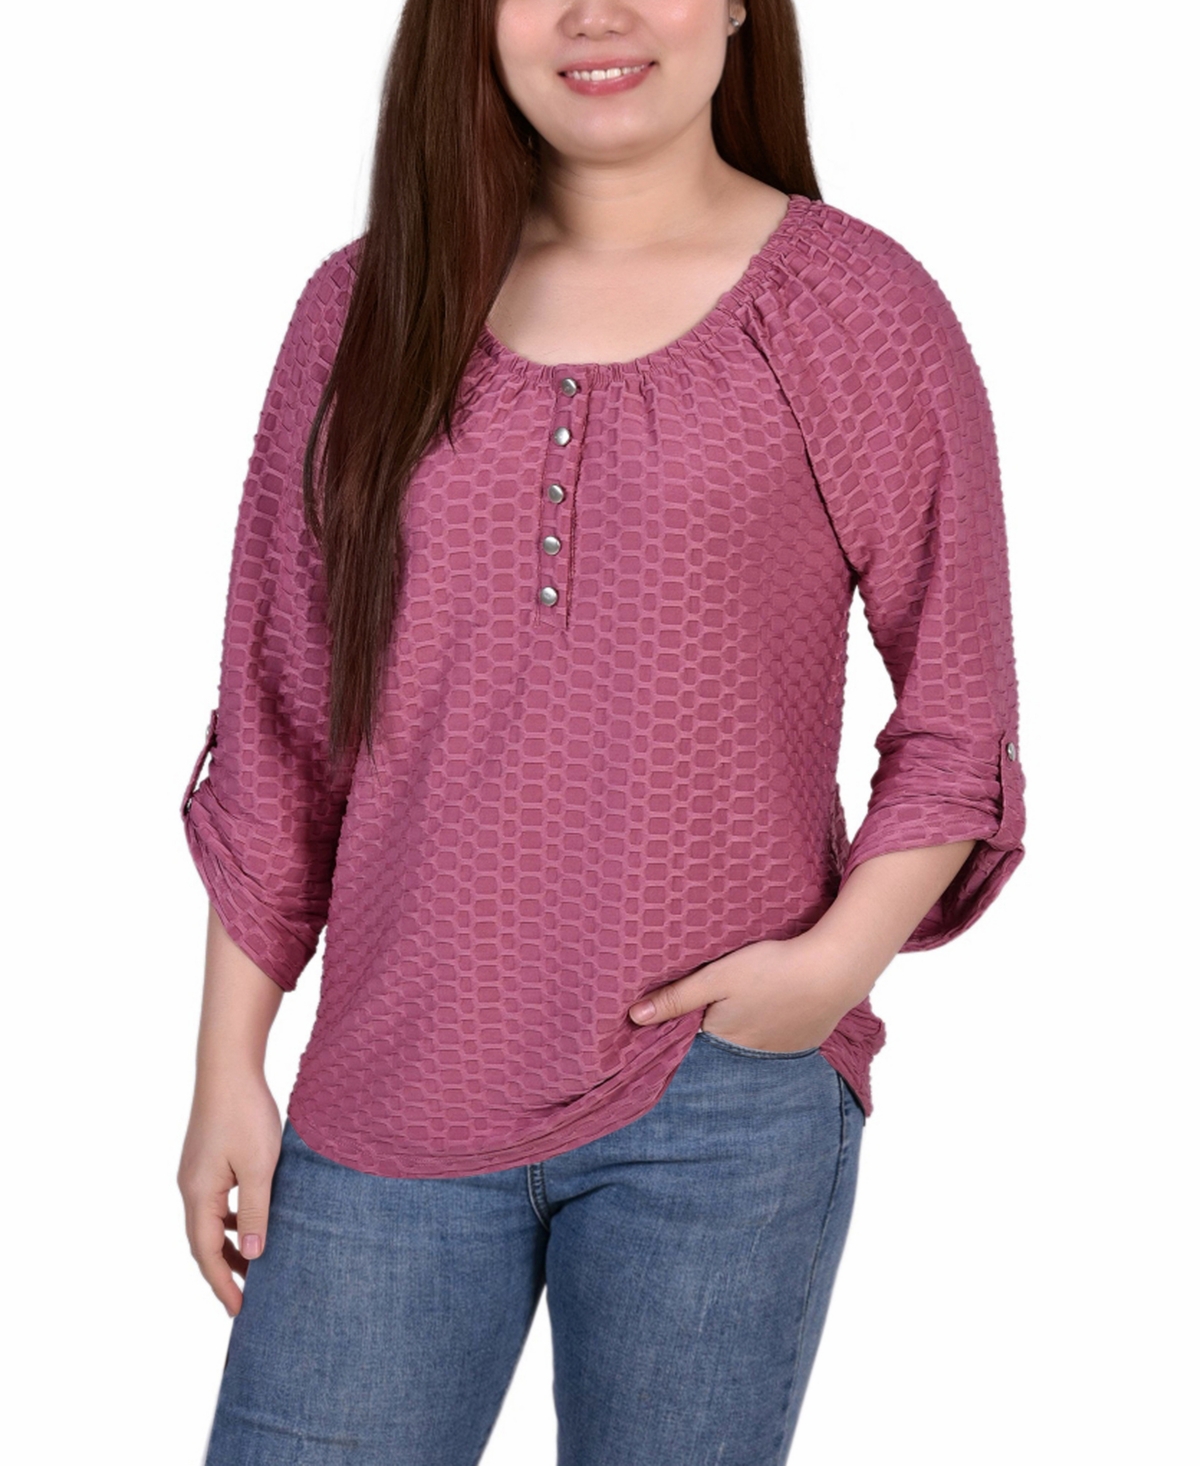 NY COLLECTION WOMEN'S 3/4 SLEEVE HONEYCOMB HENLEY TOP